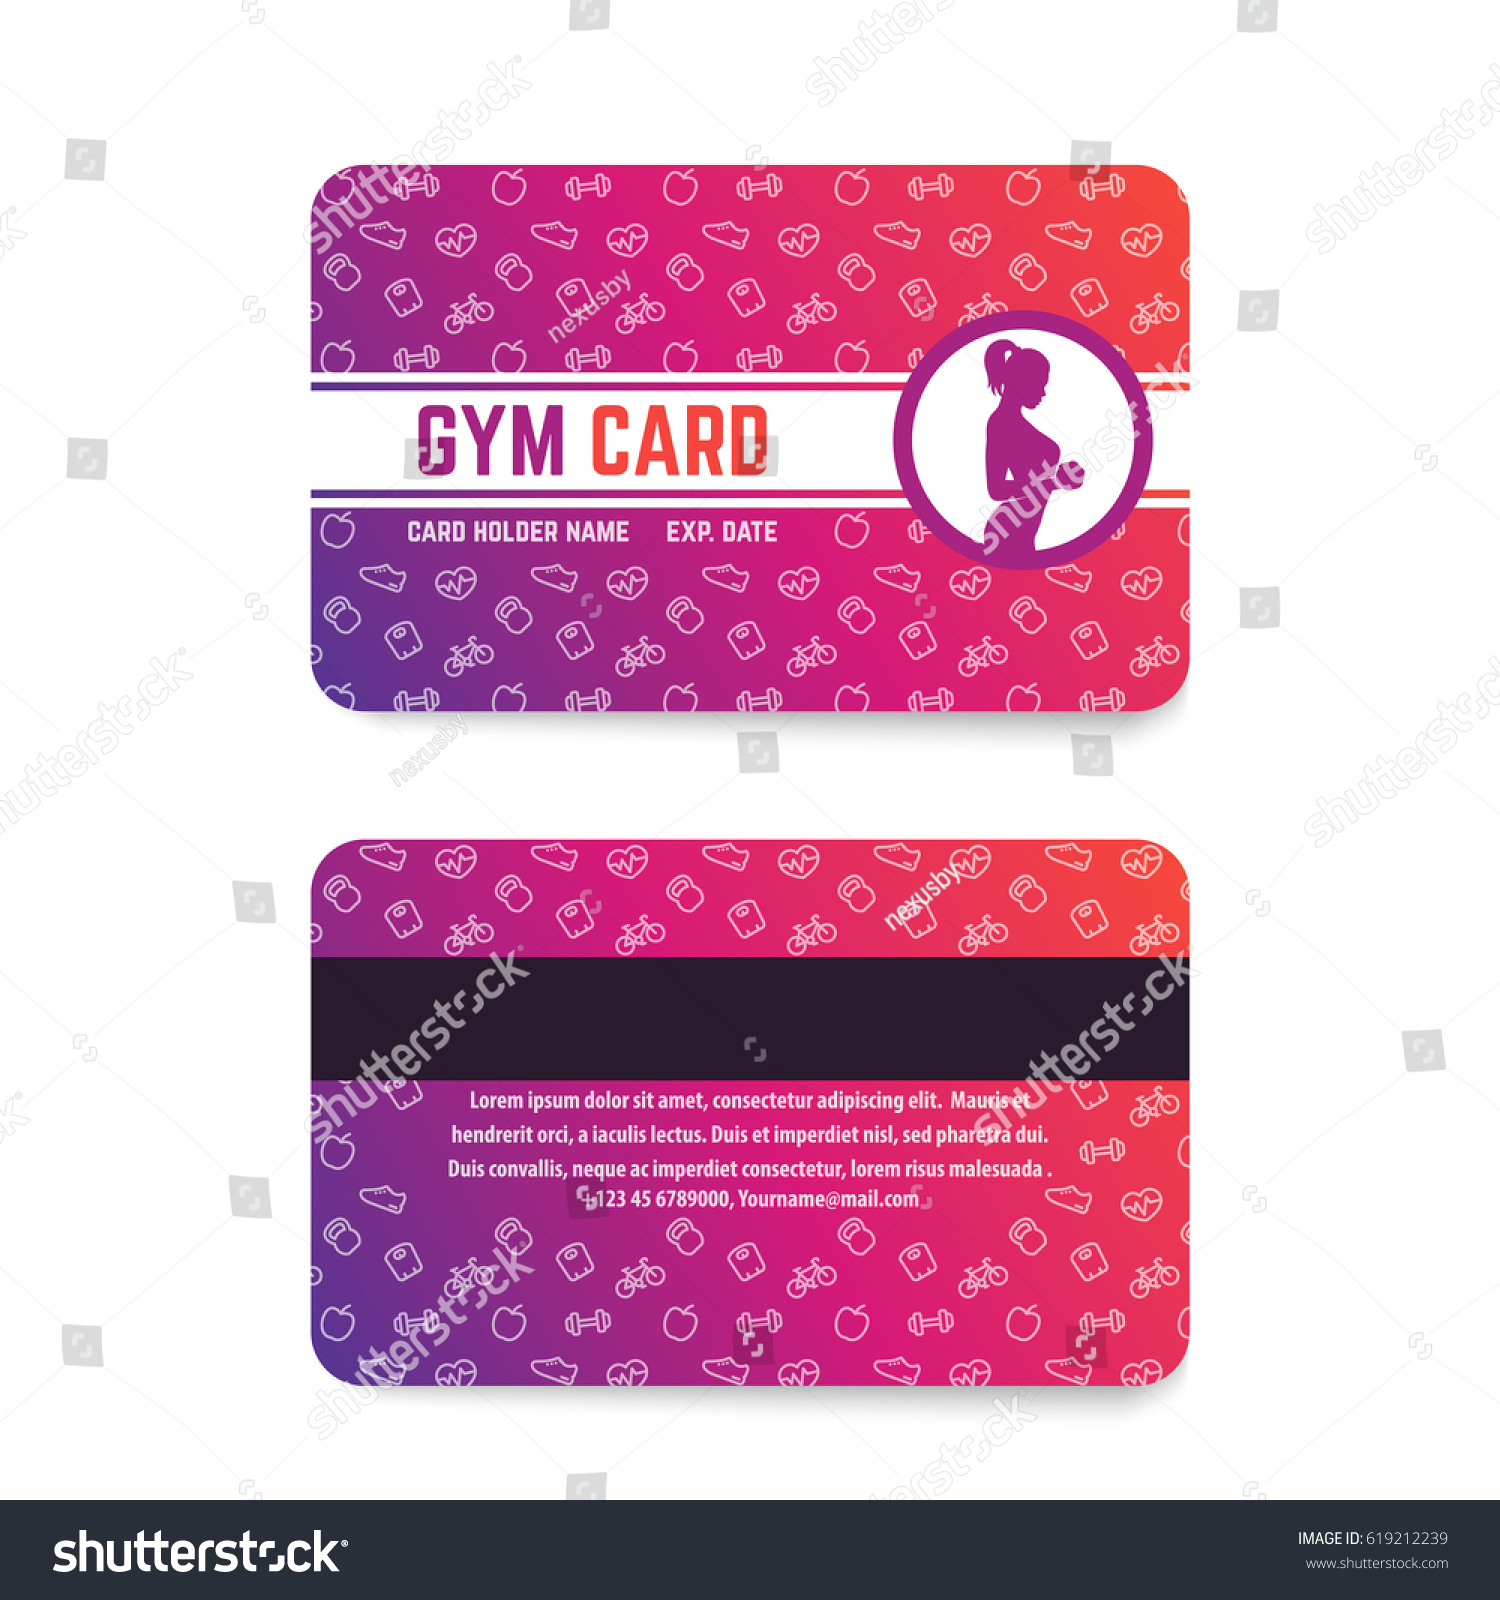 Fitness Club Gym Card Template Stock Vector (Royalty Free In Gym Membership Card Template